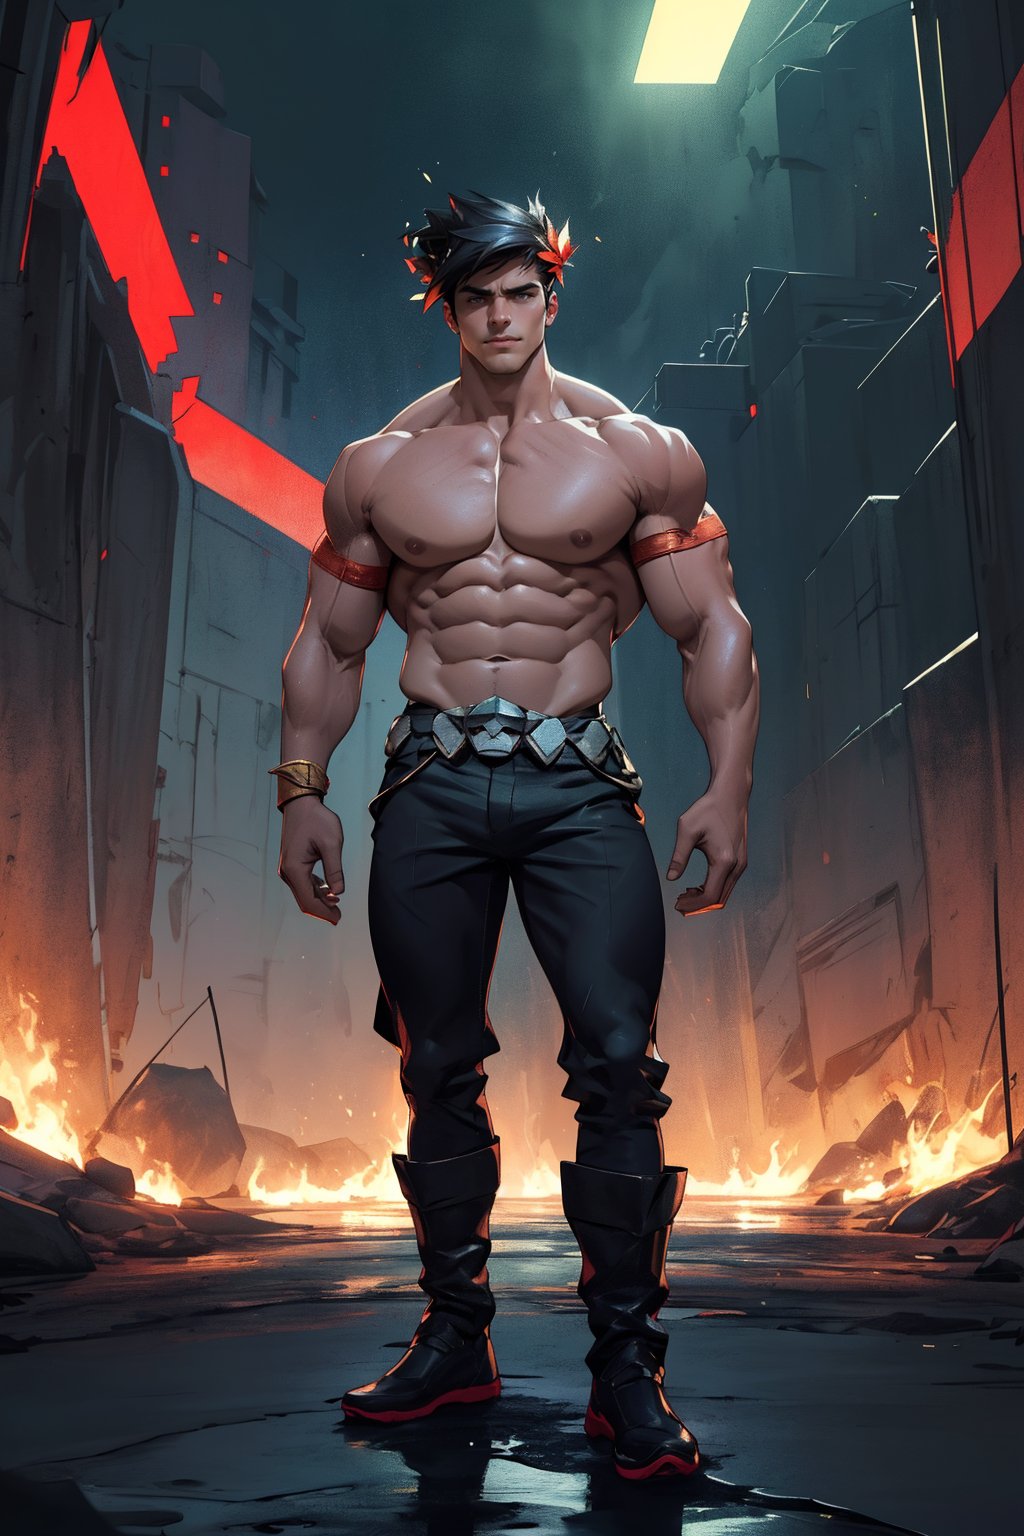 A dramatic portrait of Zagreus, standing tall with a chiseled physique, showcasing his impressive muscle definition and rugged features. He stands confidently, feet shoulder-width apart, against a dark background, allowing his physique to take center stage. Harsh lighting highlights the contours of his abs and biceps, while a subtle shadow accents the sharp edges of his jawline. The overall framing emphasizes Zagreus' powerful presence.